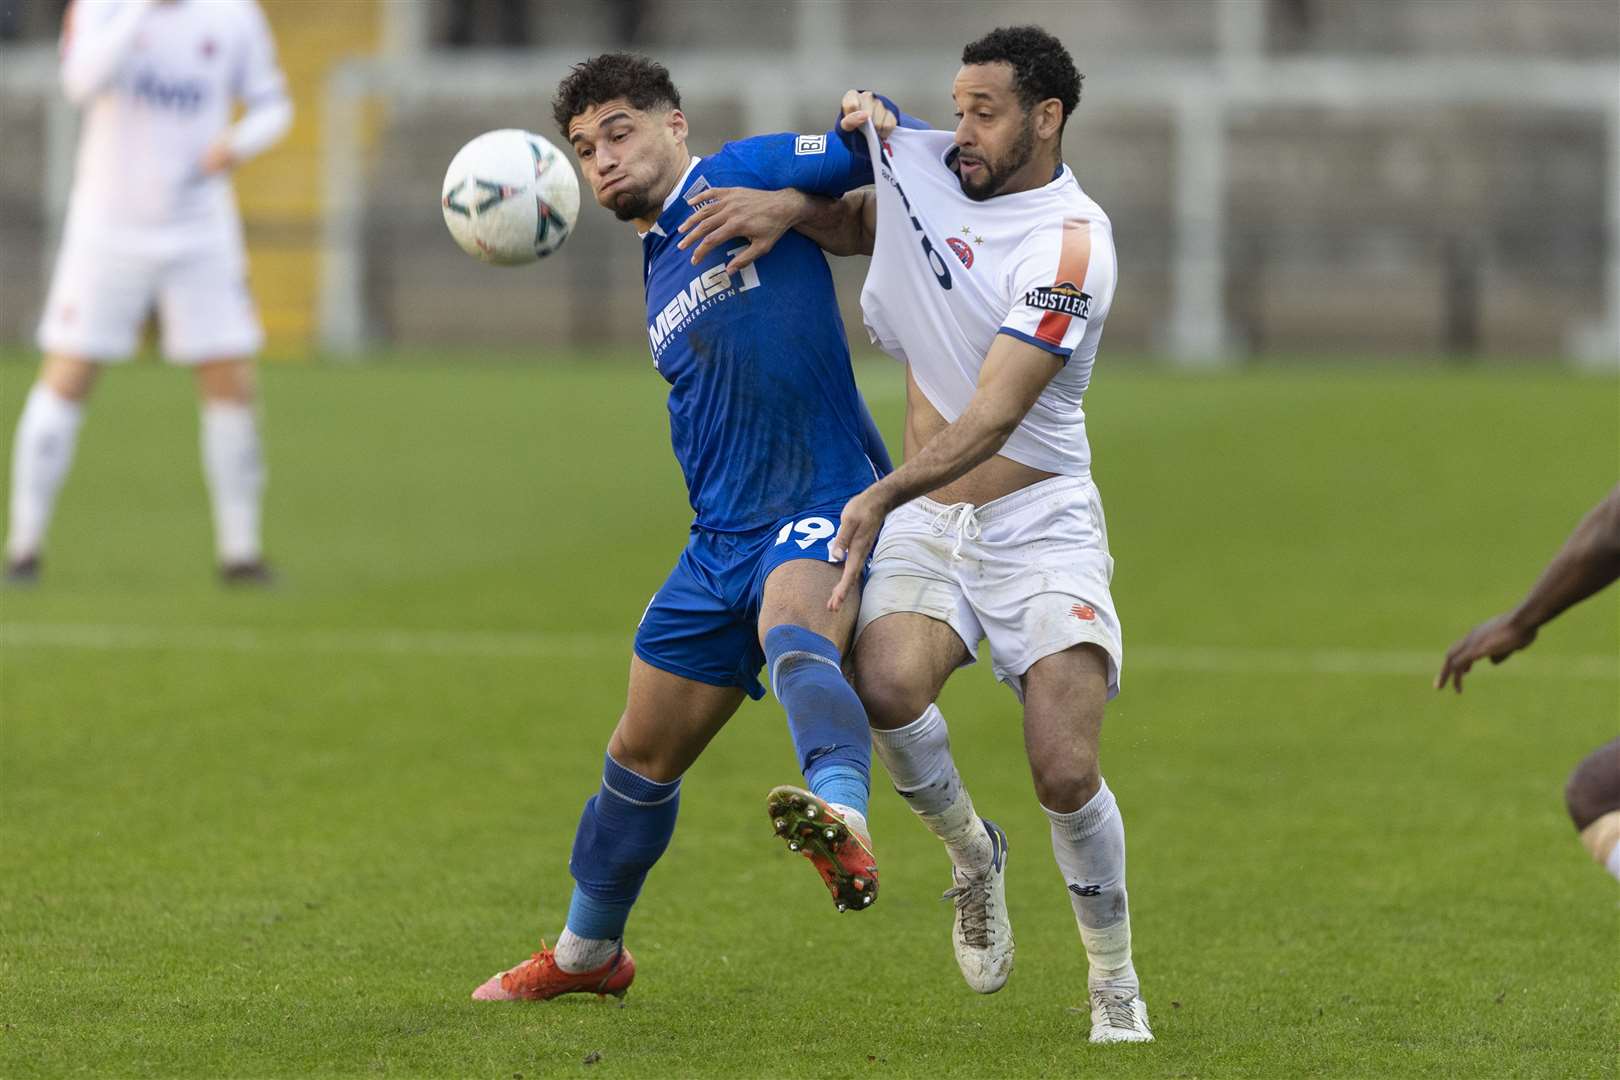 Lewis Walker and Curtis Weston battle for the ball as AFC Fylde hold Gillingham to a 1-1 draw in the first FA Cup meeting Picture: KPI